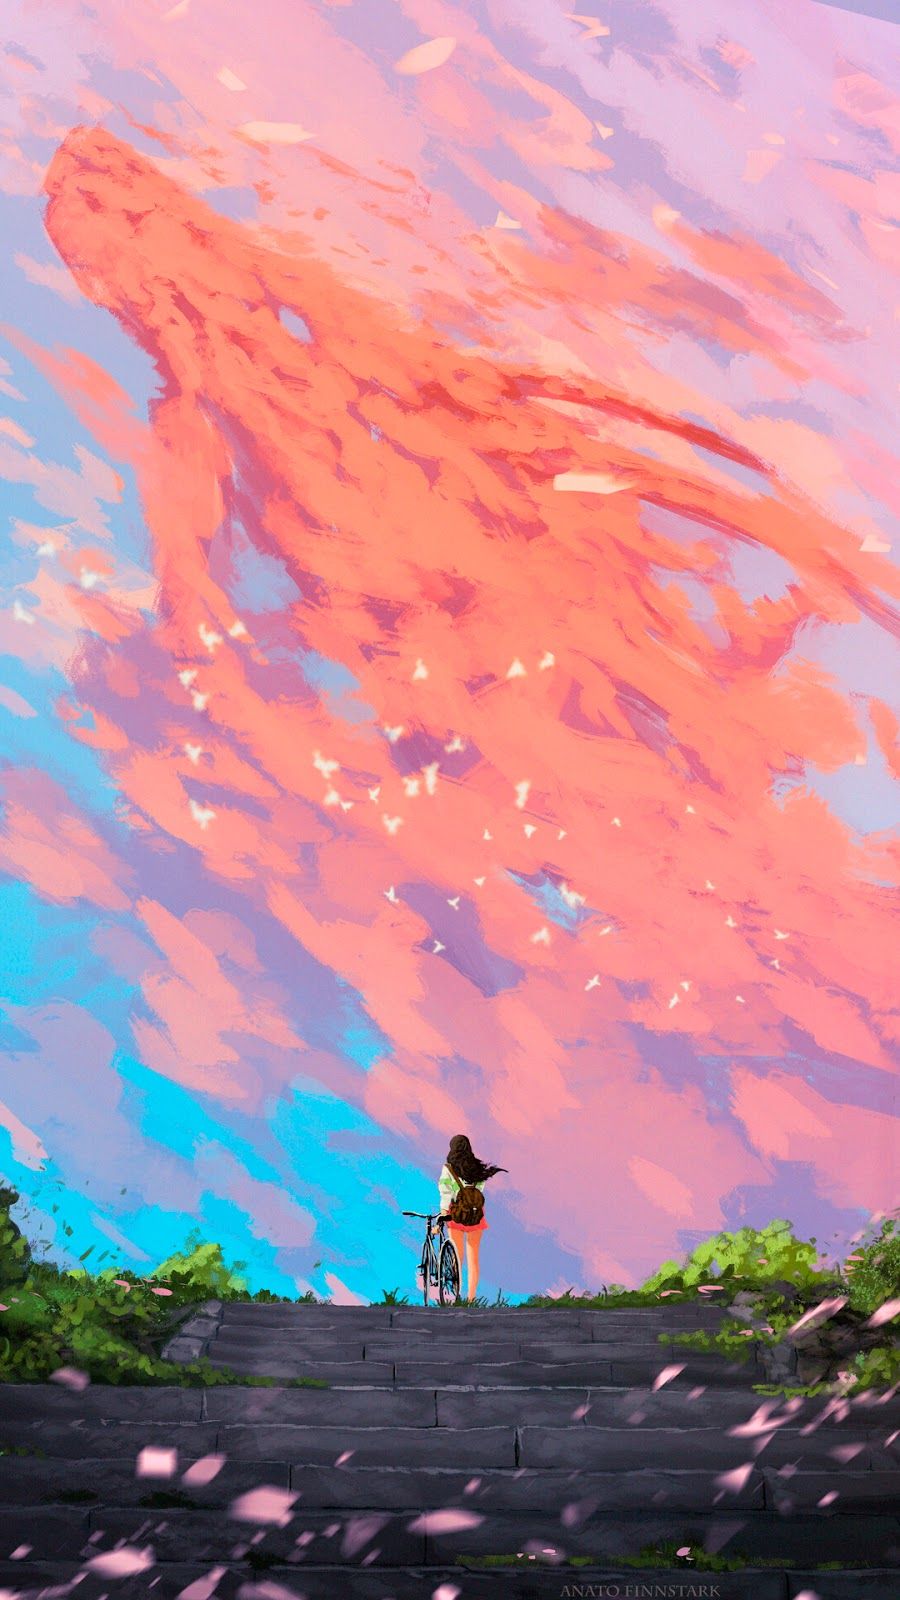 Anime background wallpaper for phone